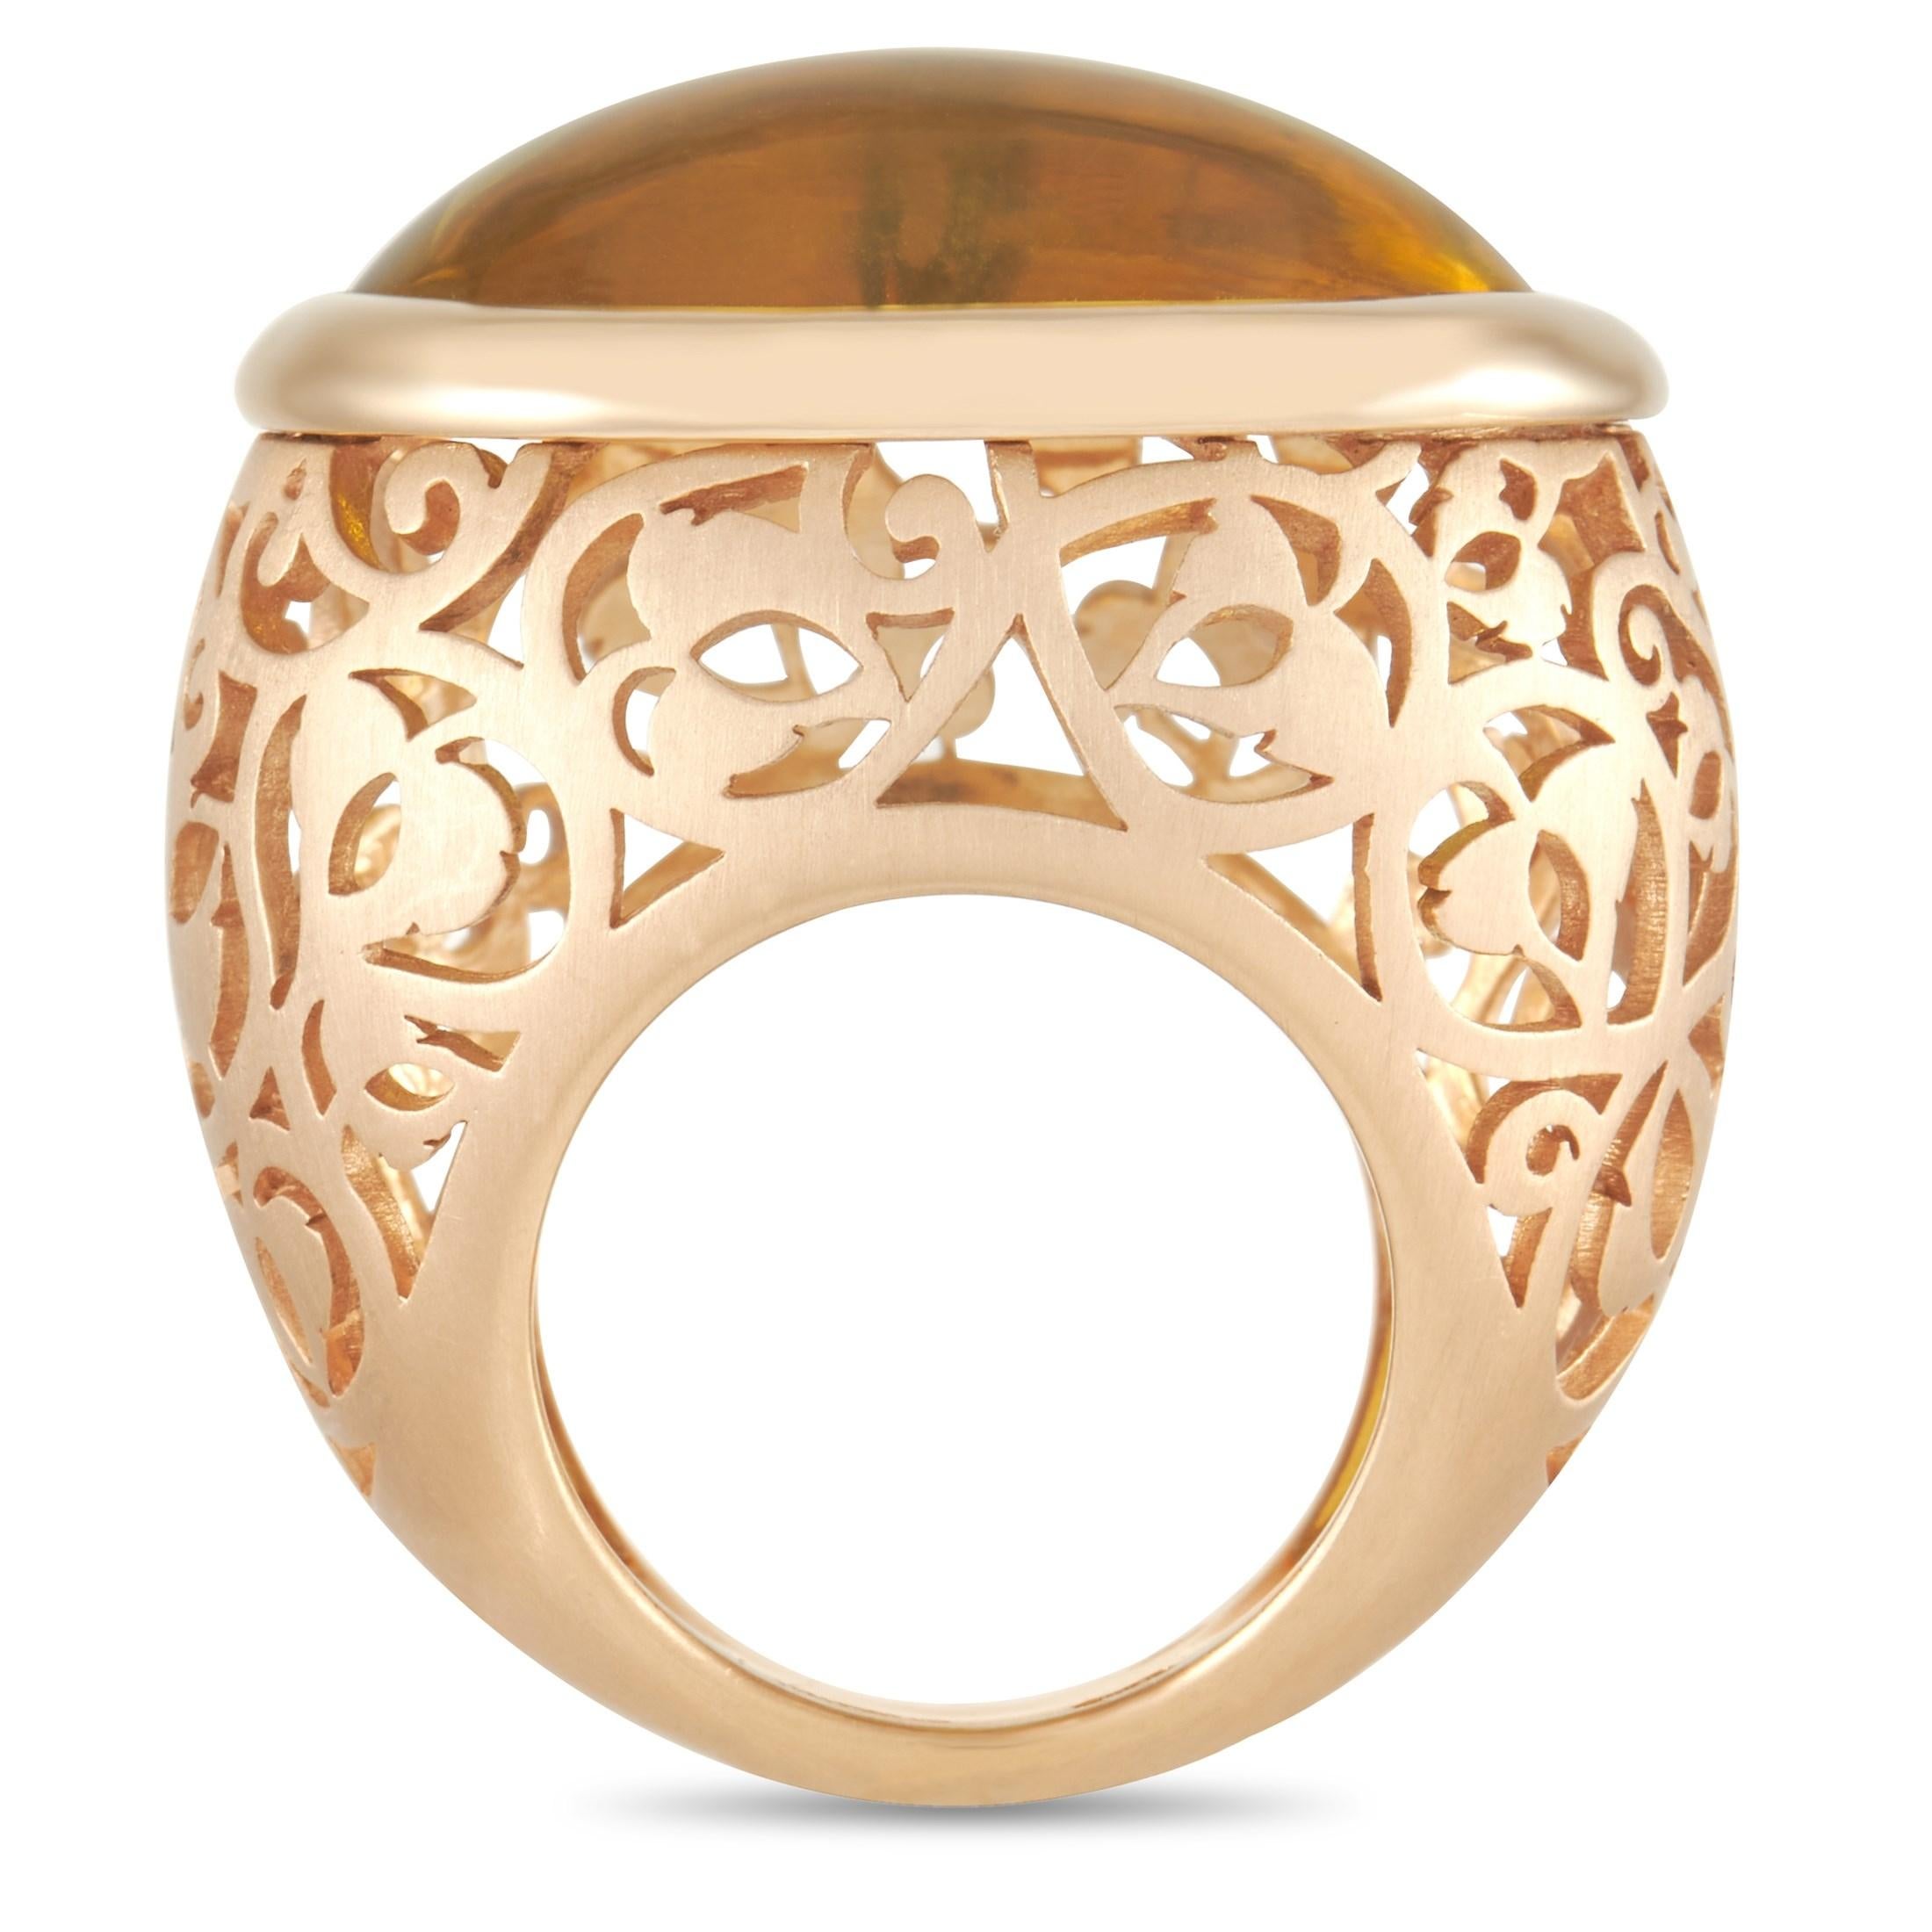 Intricate metalwork and a statement-making Amber gemstone ensure that this ring is nothing short of exquisite. Both bold and delicate at the exact same time, the sides feature a meticulous floral openwork pattern that capitalizes on the negative